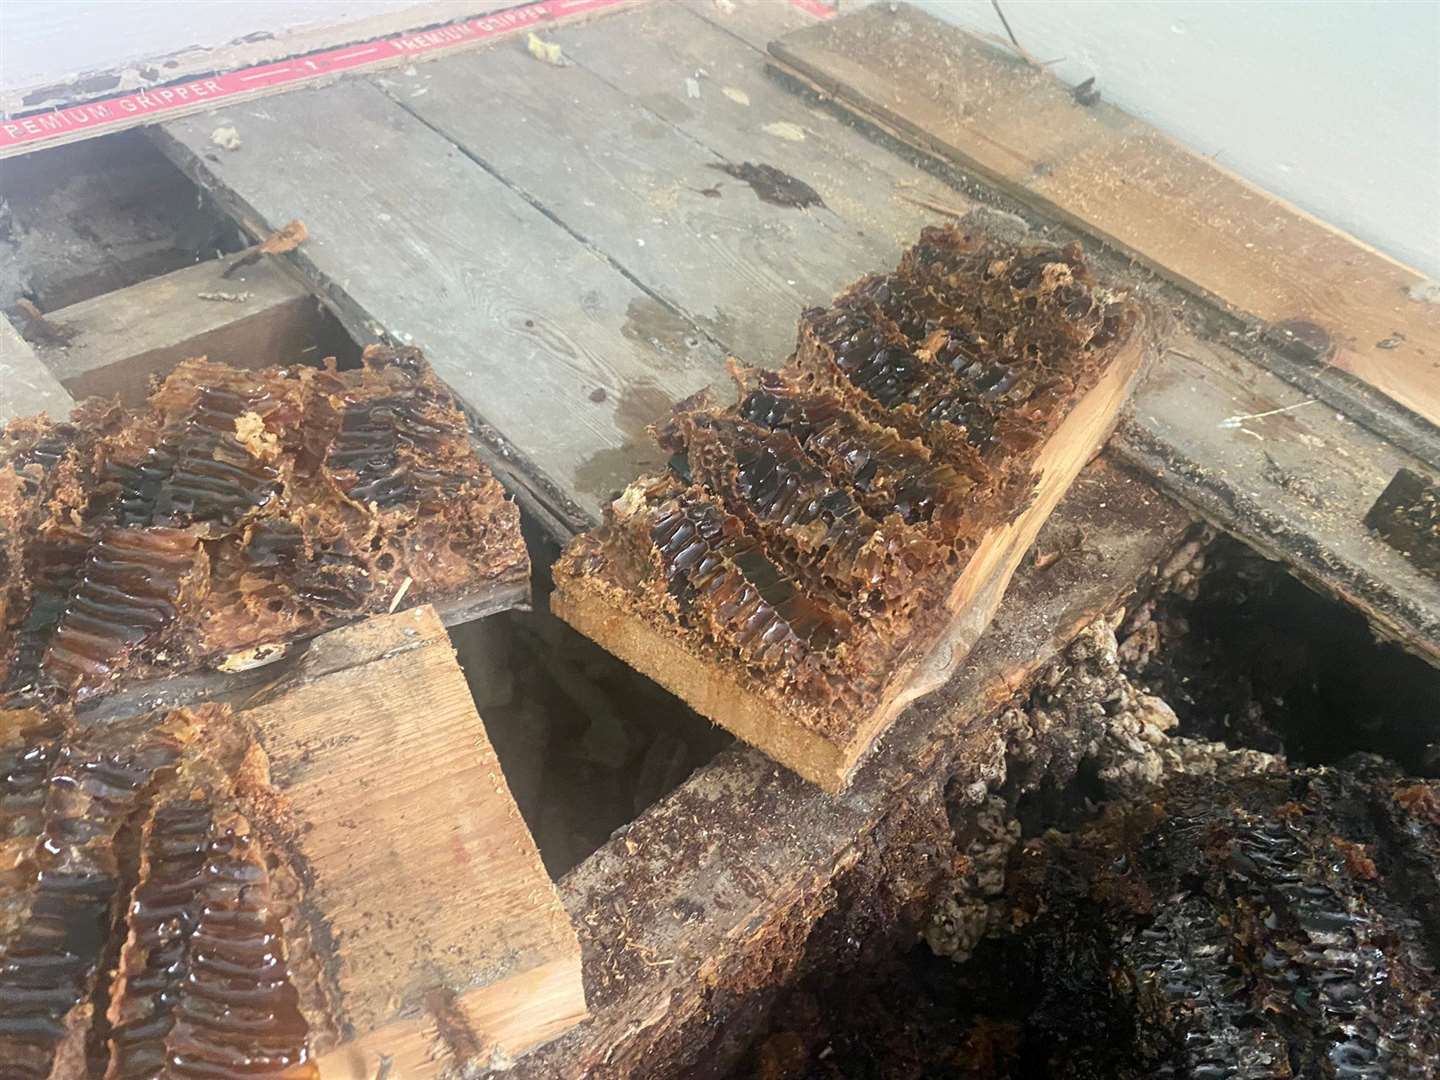 They were shocked at what they discovered when they pulled the floorboards up at their home in Folkestone. Picture: SWNS